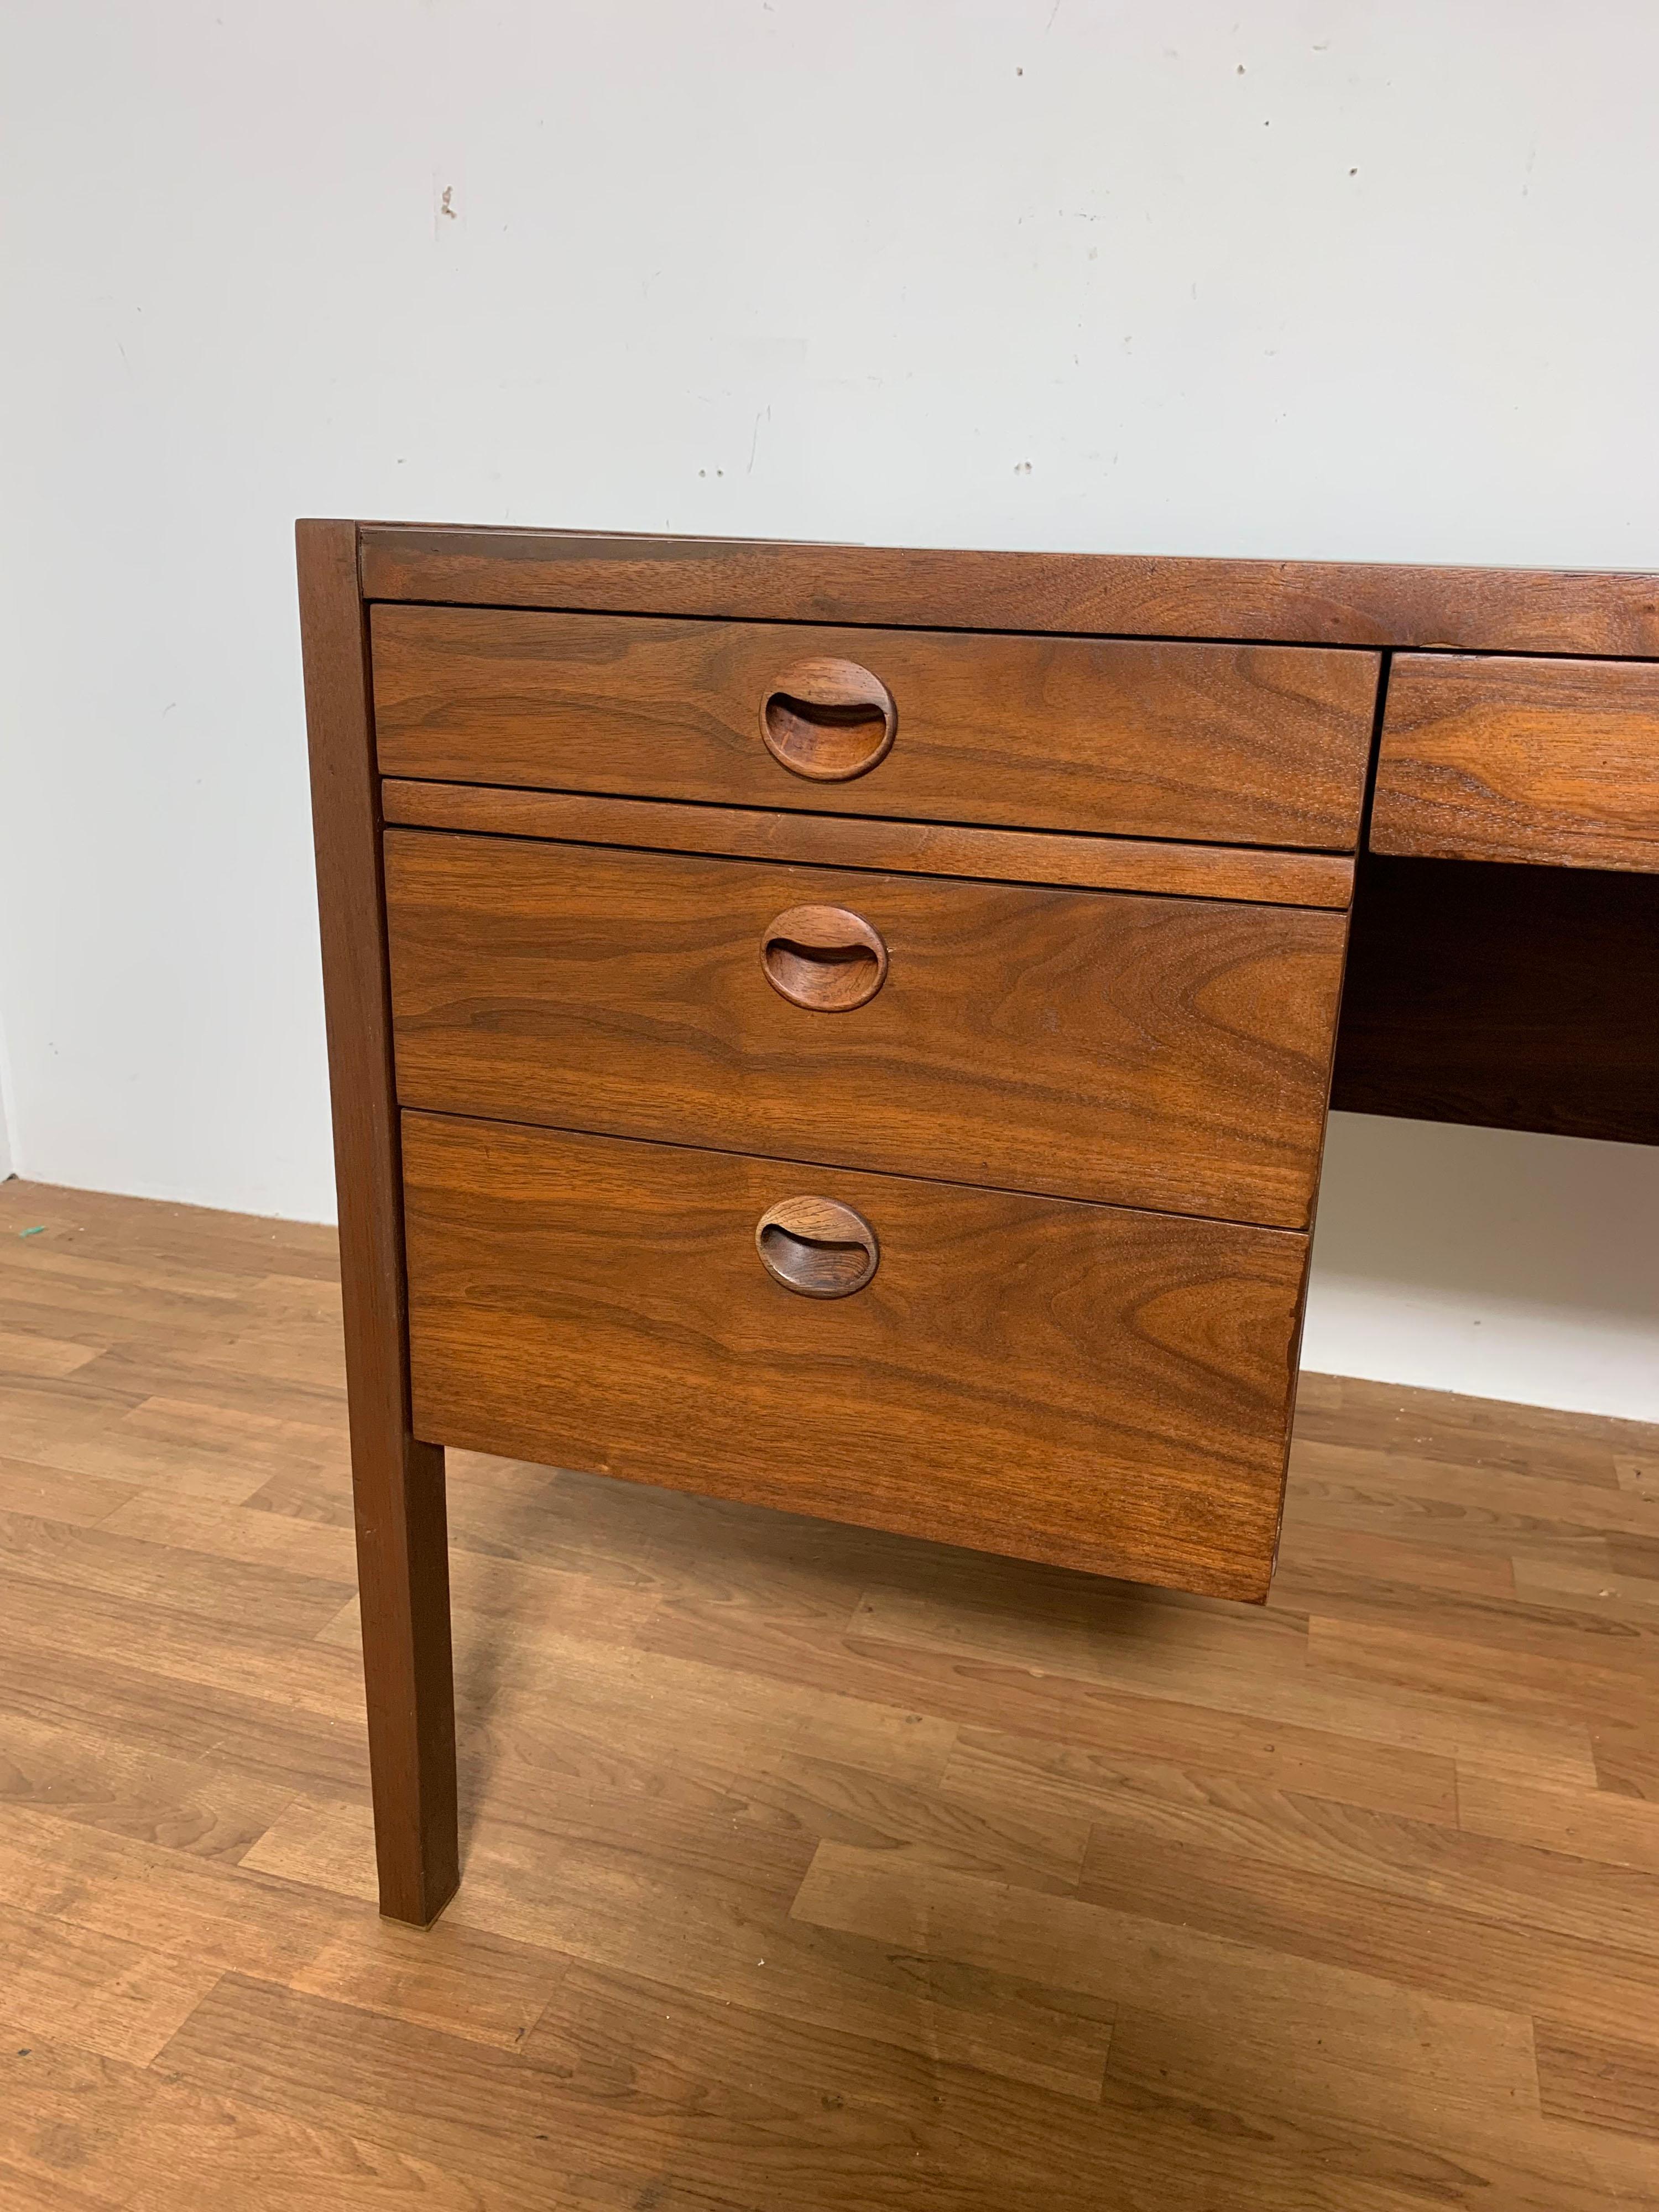 Executive desk with six drawers in walnut with rosewood drawer pulls by Edward Wormley for Dunbar, ca. 1950s. Features a kick screen, a file drawer, two sliding returns, and brass feet.